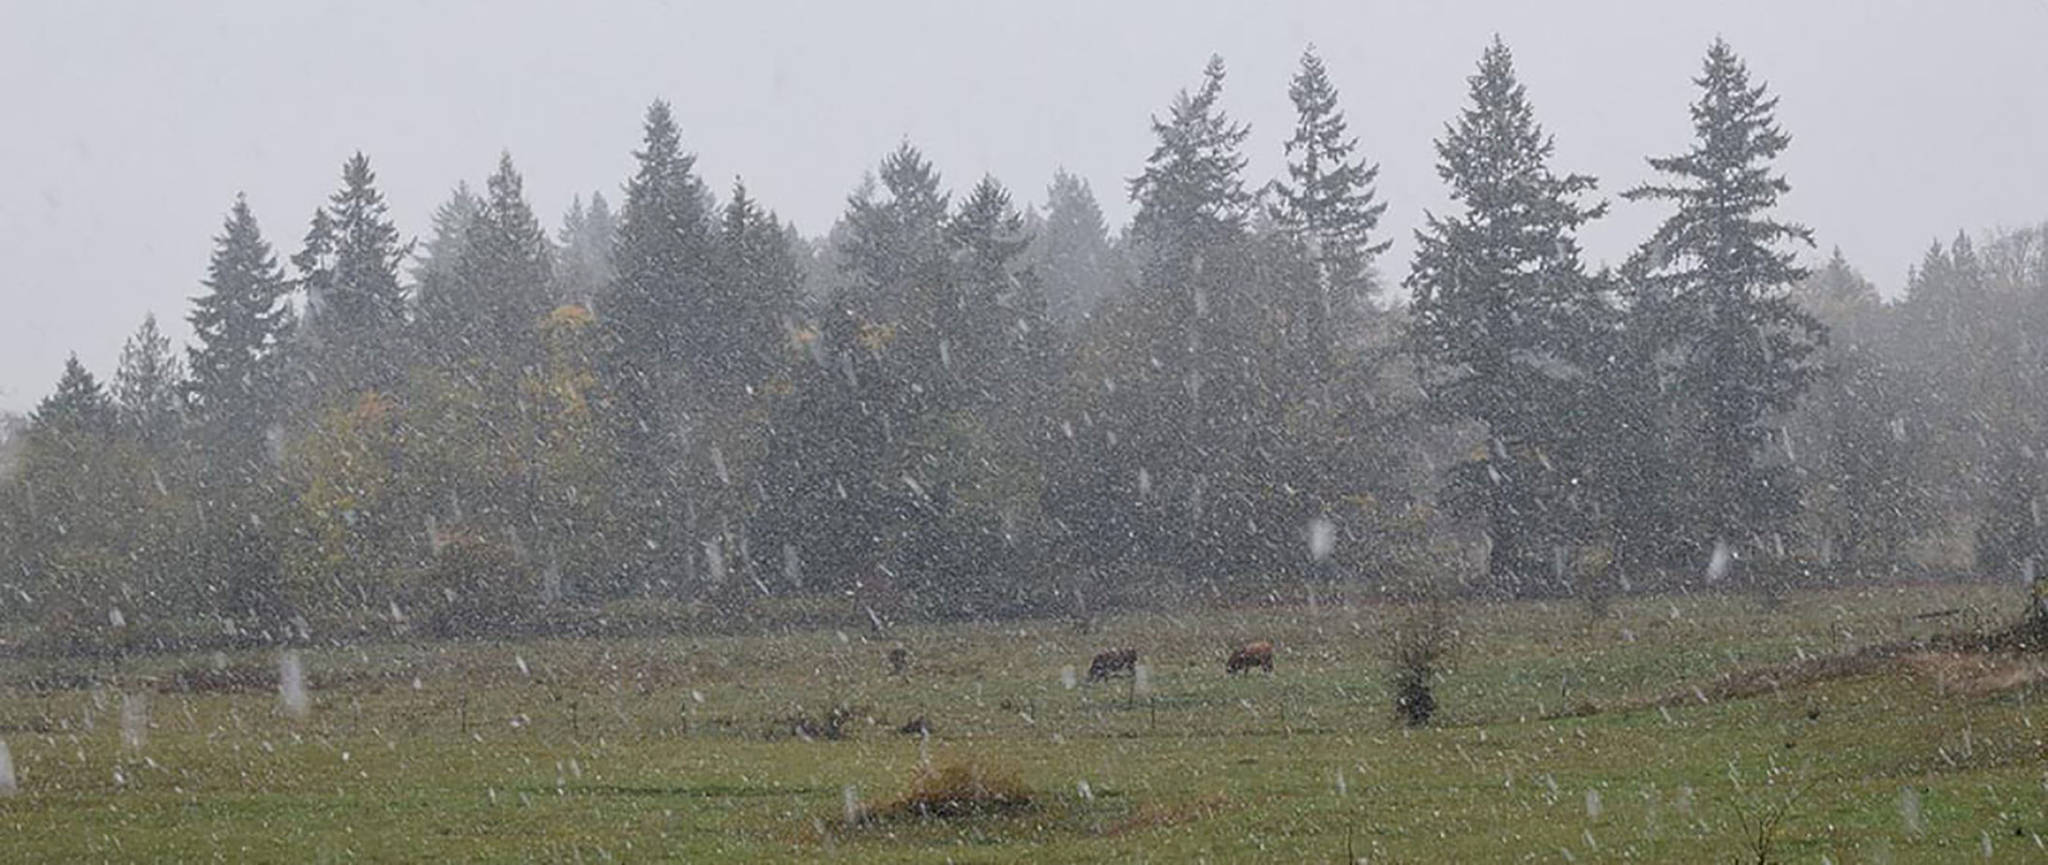 Snow falls in an Auburn field early Sunday, an early sign of impending winter. The weekend storm kept temperatures in the mid-to-low 30s. RACHEL CIAMPI, Auburn Reporter